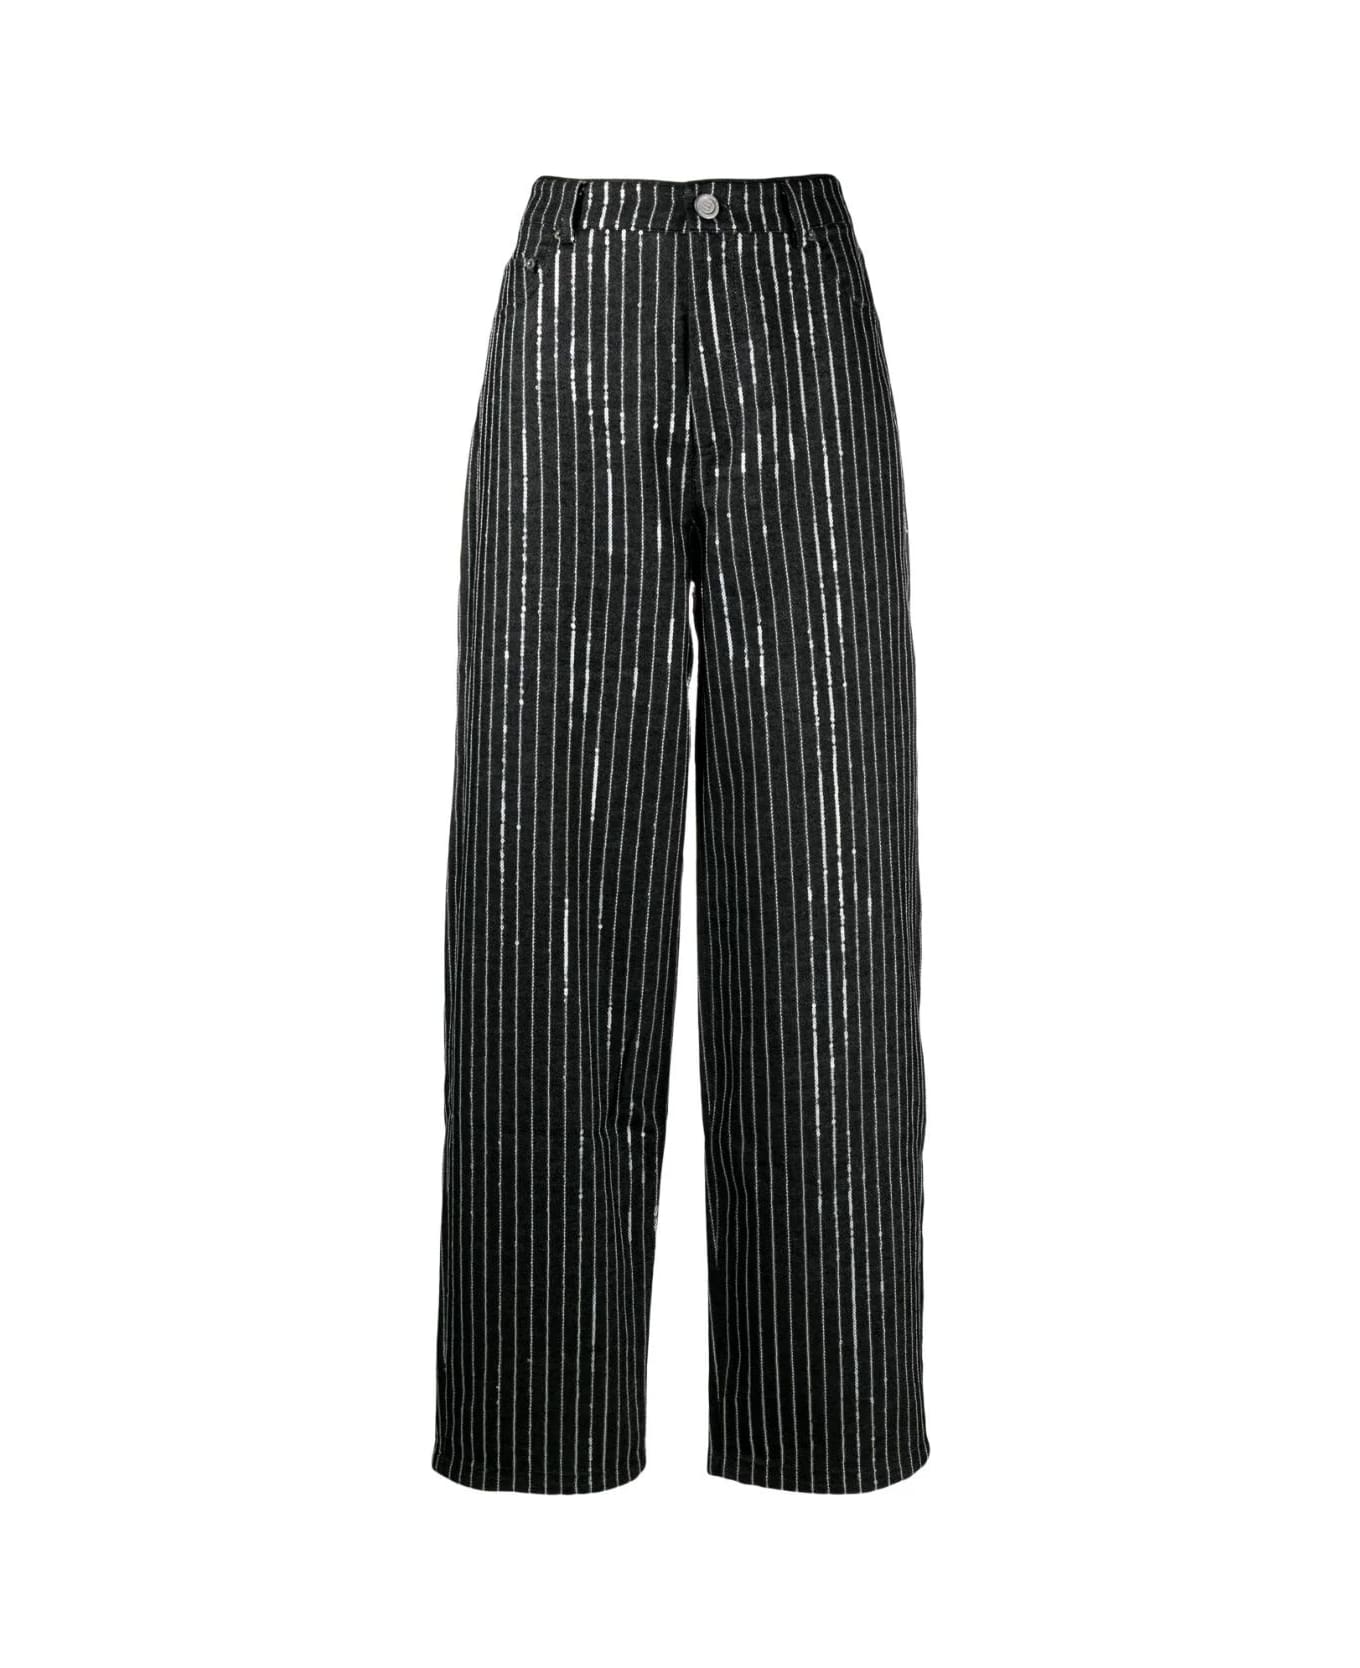 Rotate by Birger Christensen Sequin Twill Wide Pants - Black